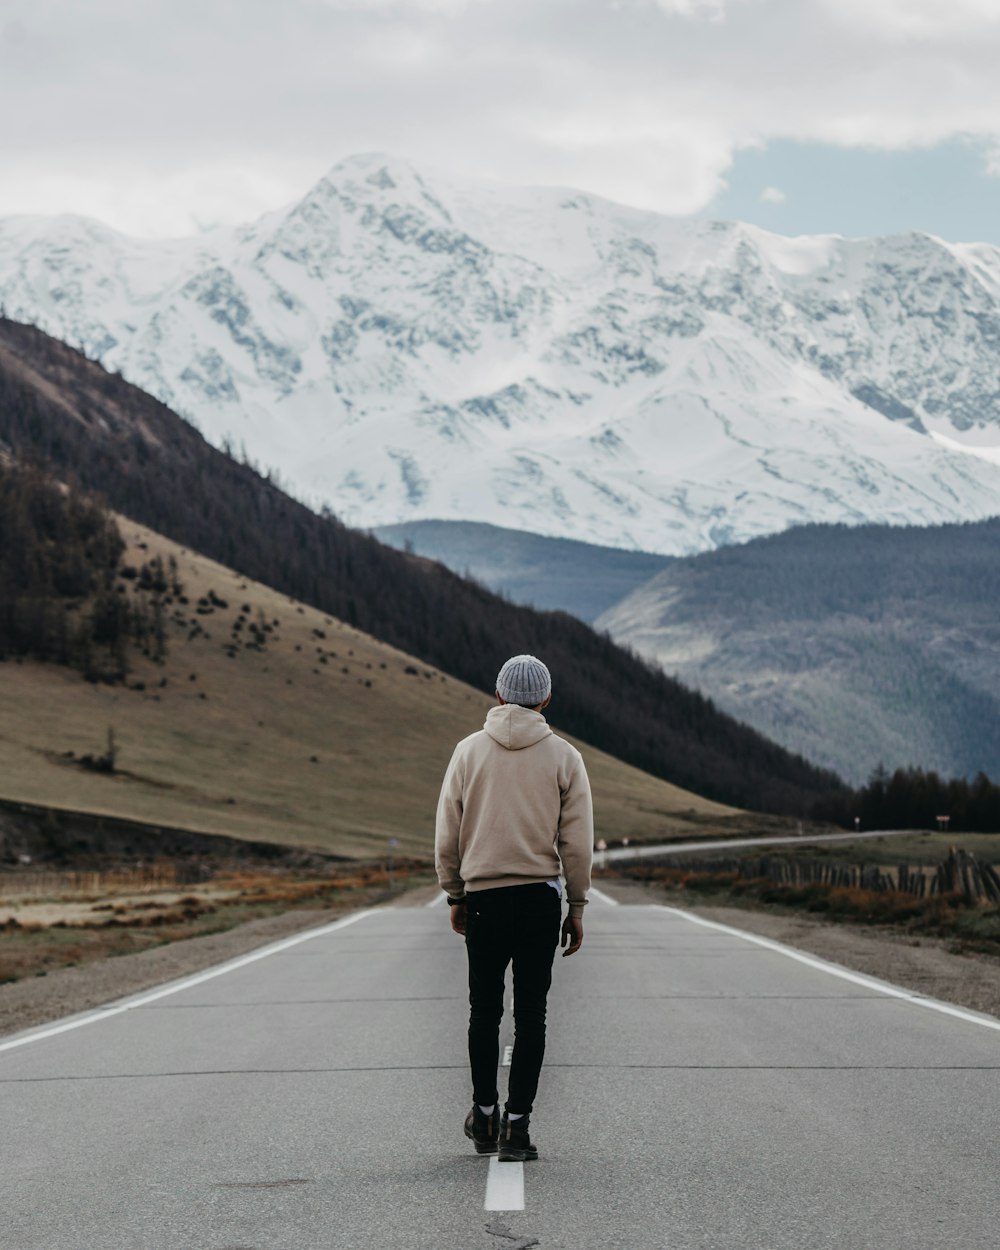 a person walking on a road with a mountain in the background